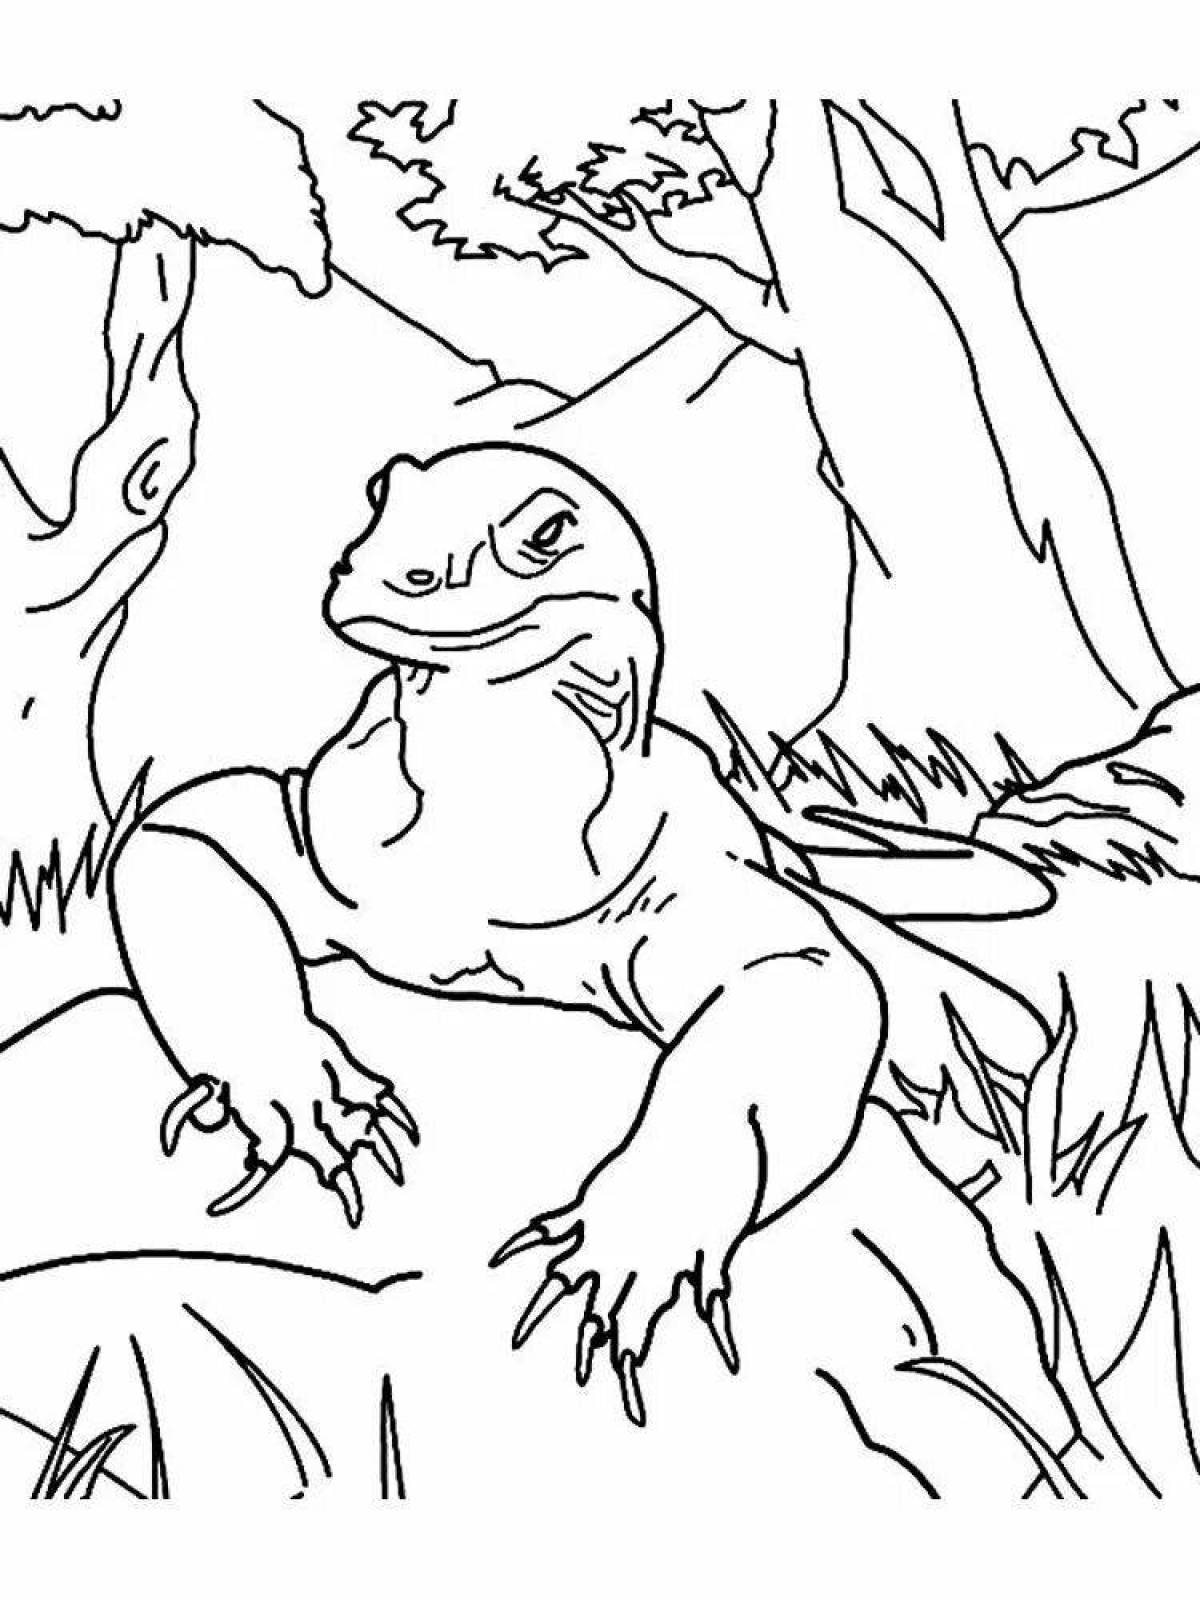 Radiated monitor coloring page